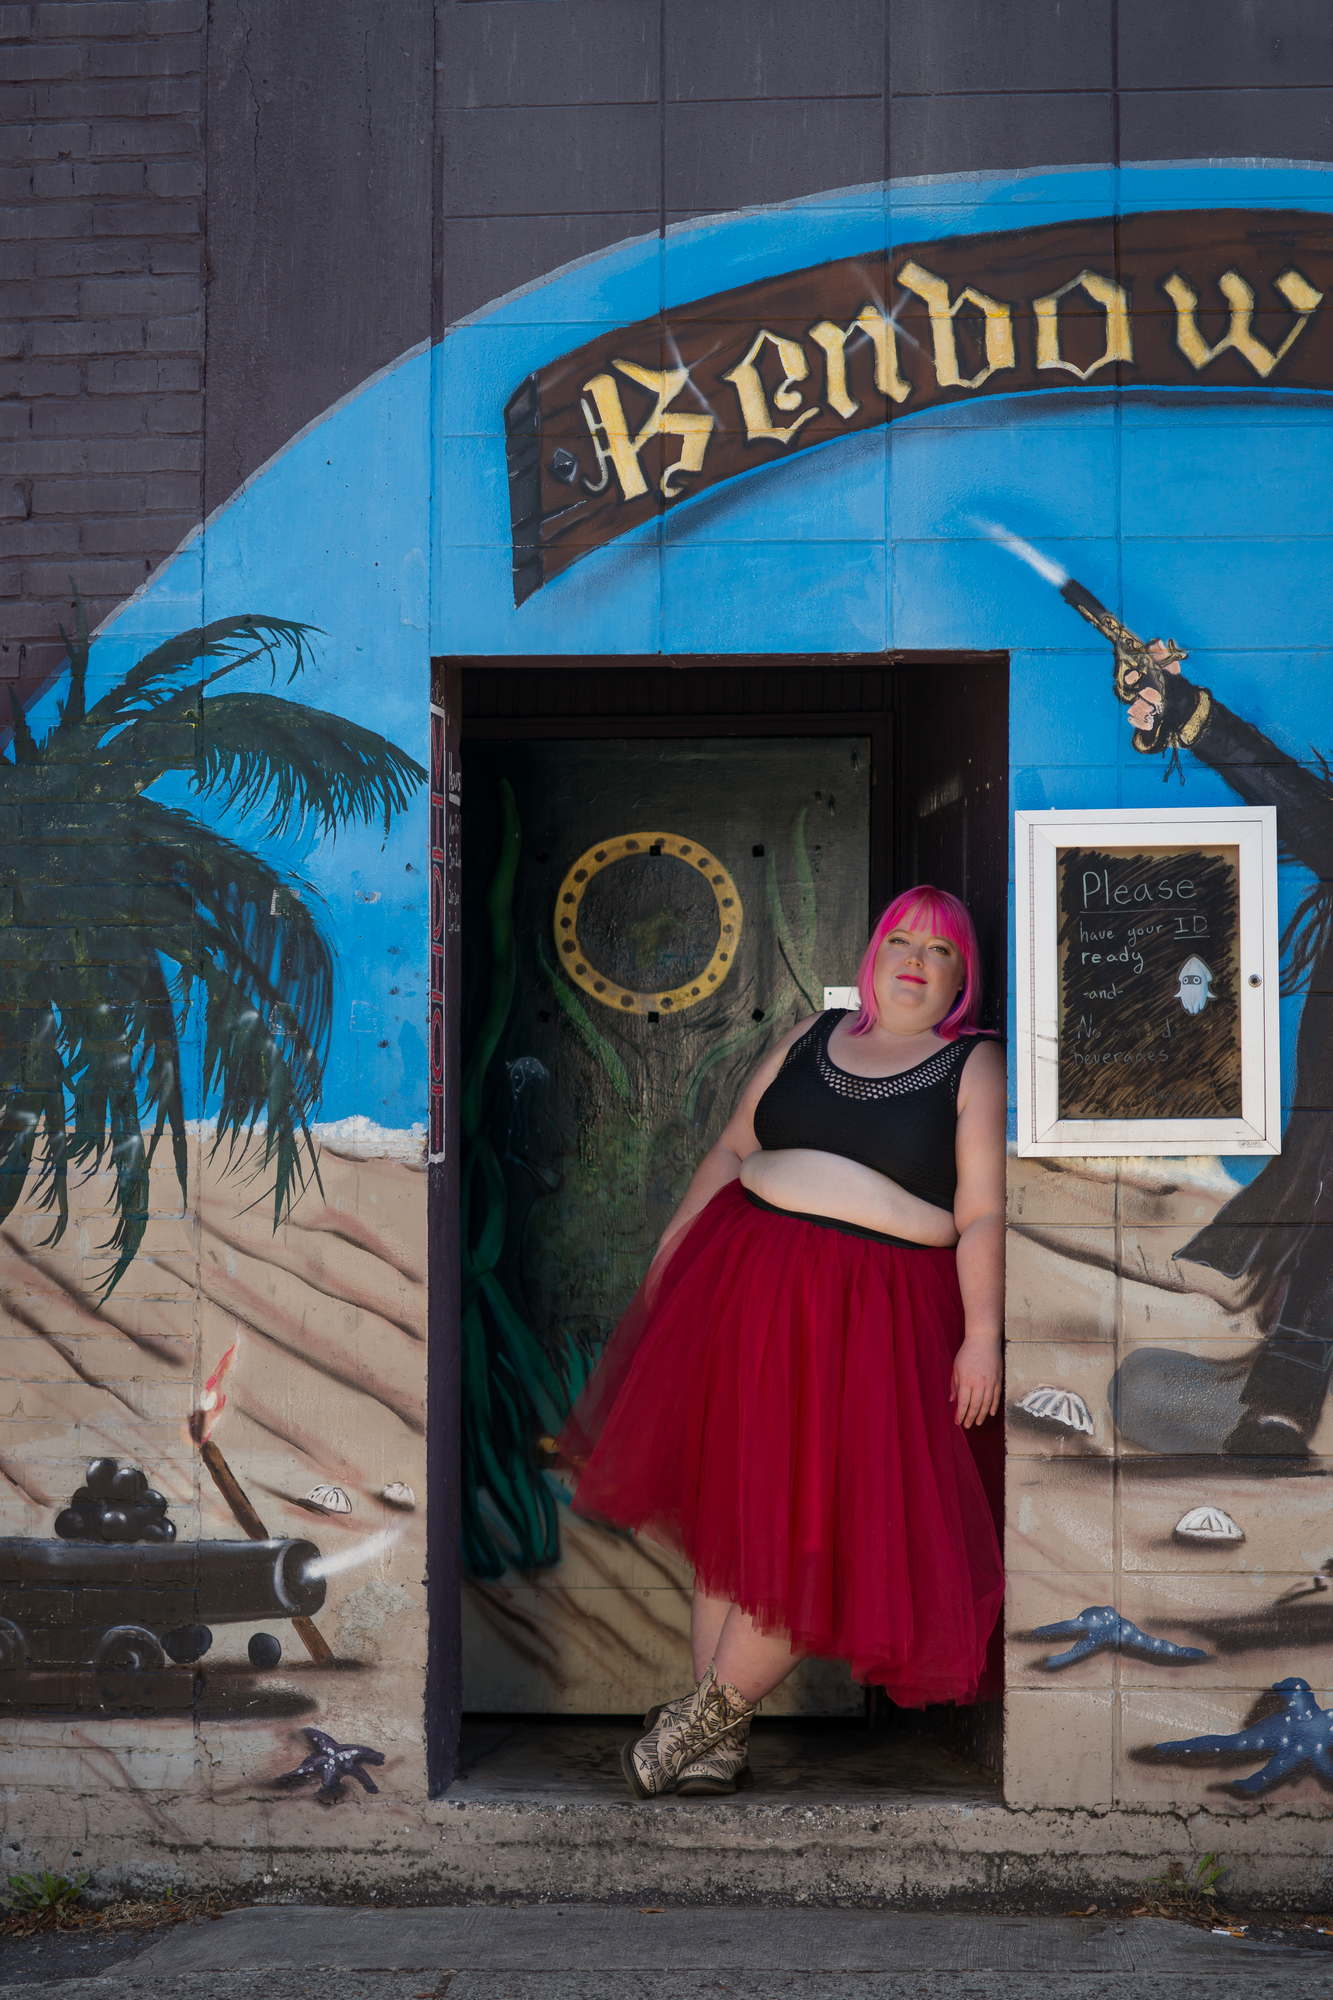 A fat woman with pink hair leans against a doorframe in a red skirt and a crop top